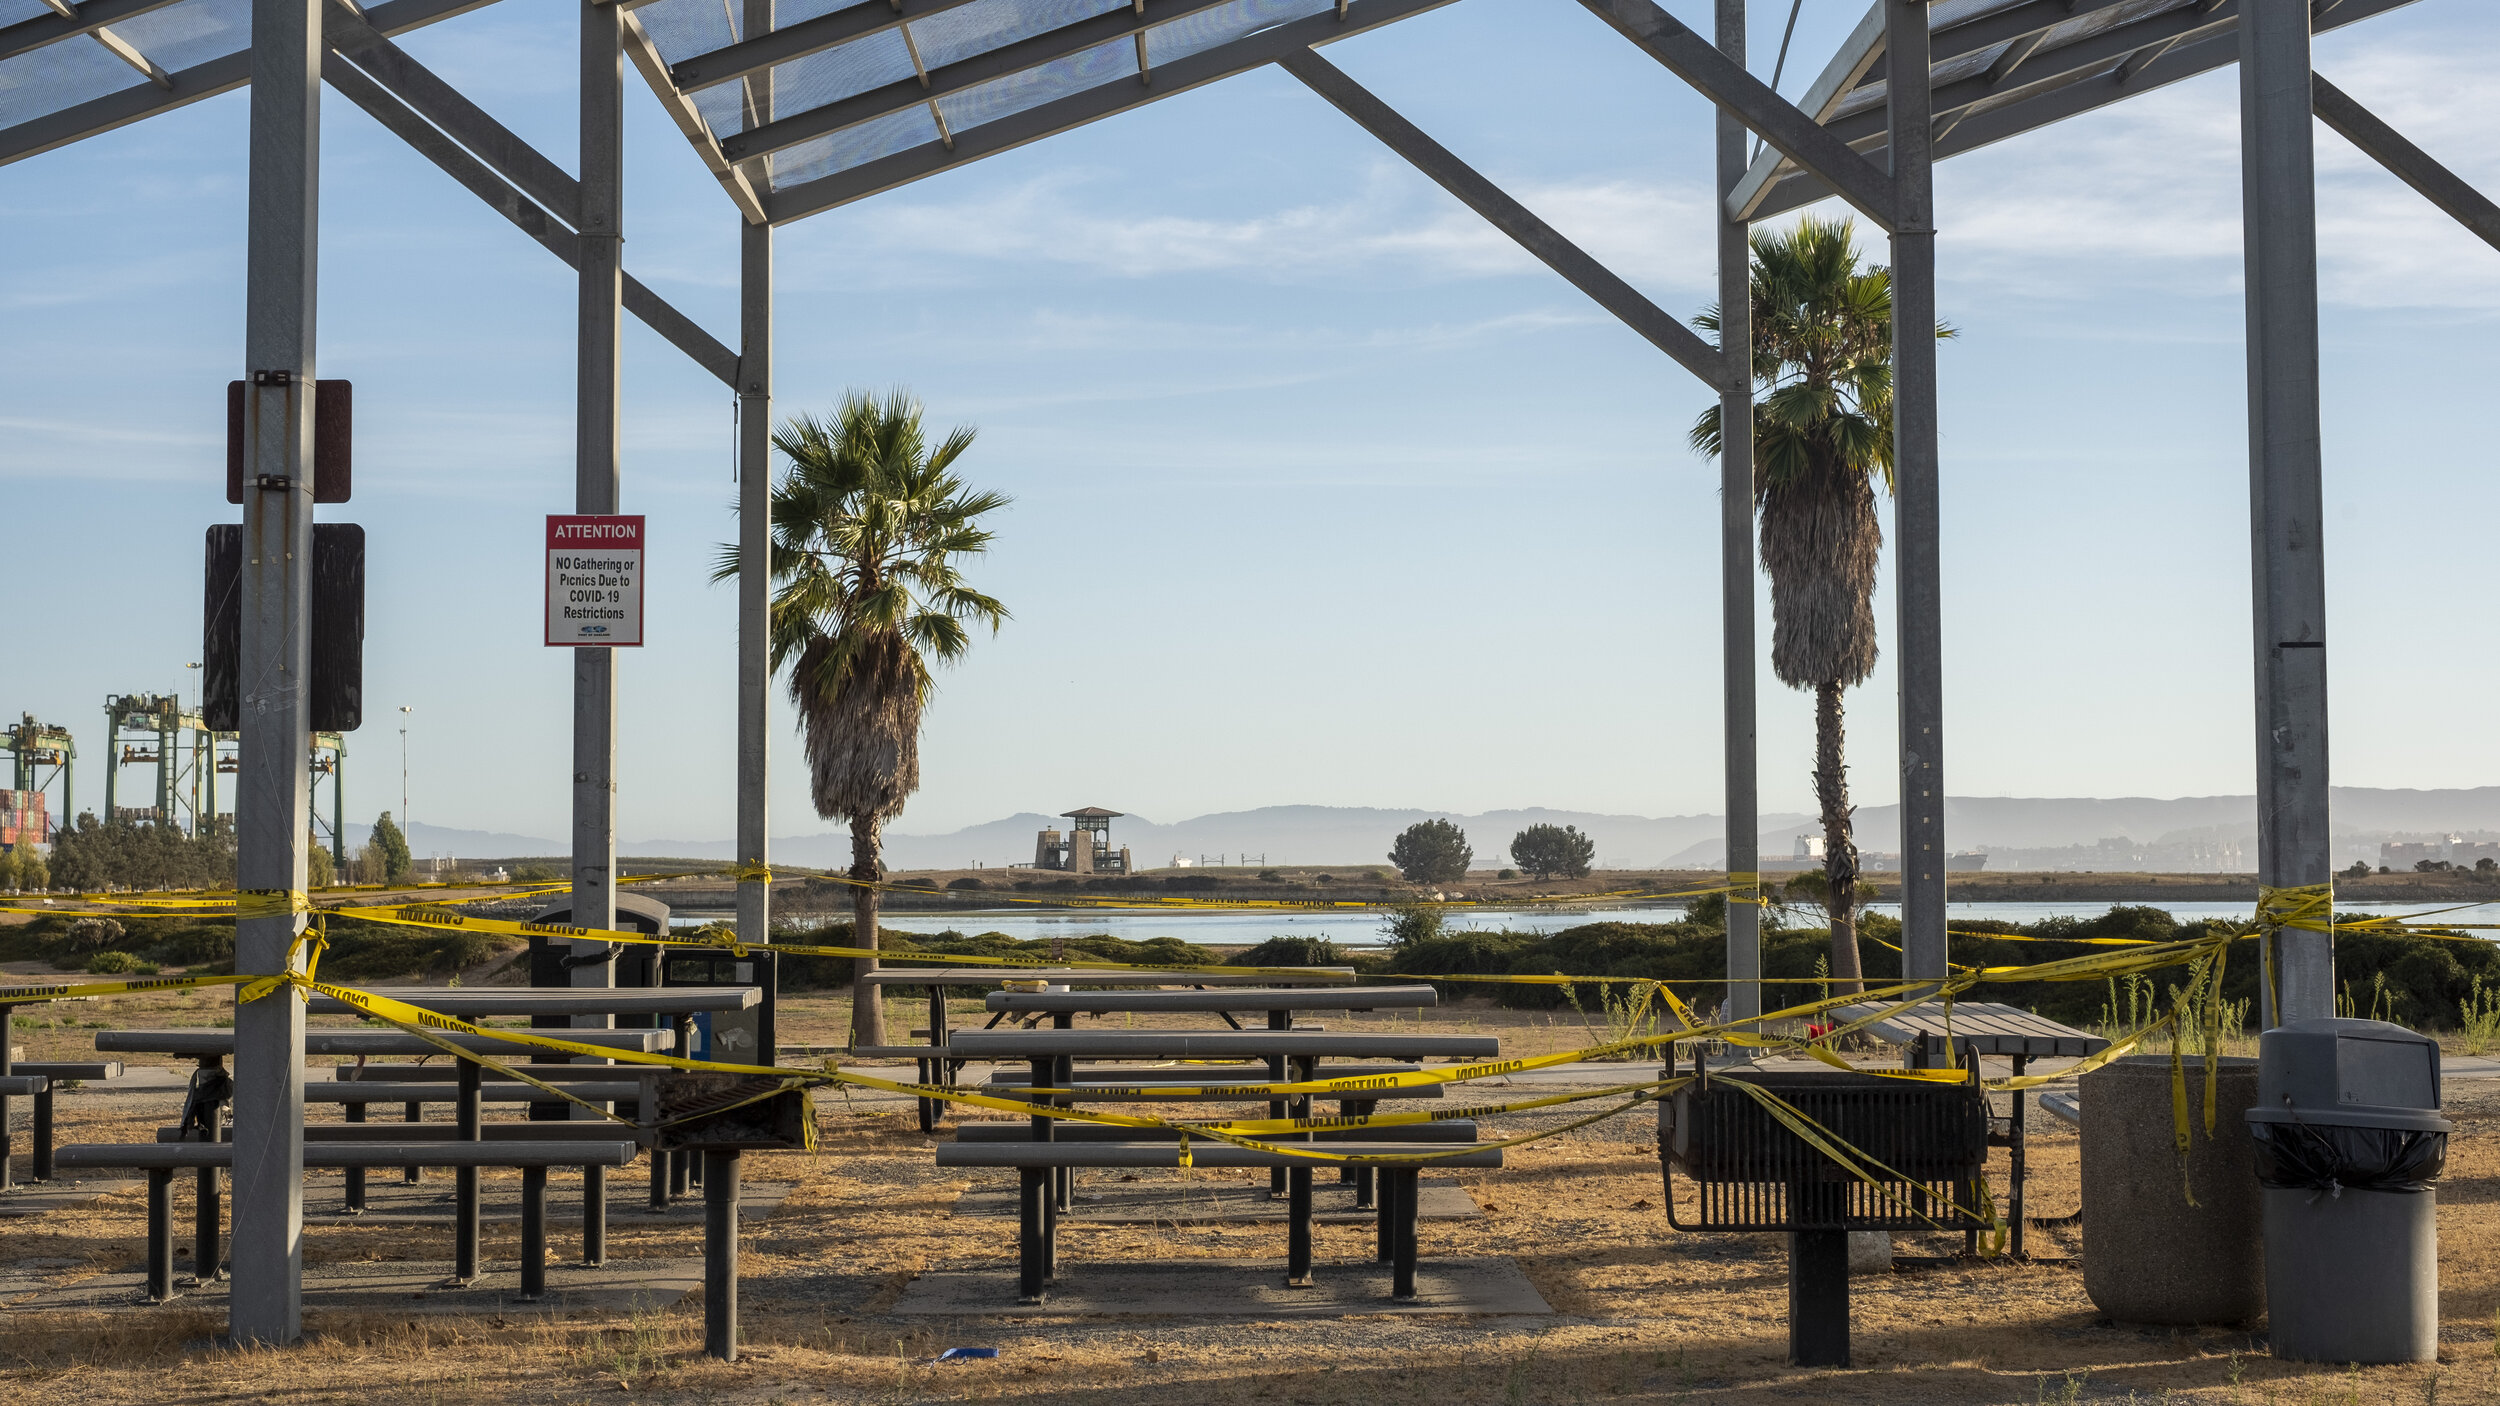 BBQ area closed due to social distancing measures. Maritime Park. Oakland, California. 2020. 